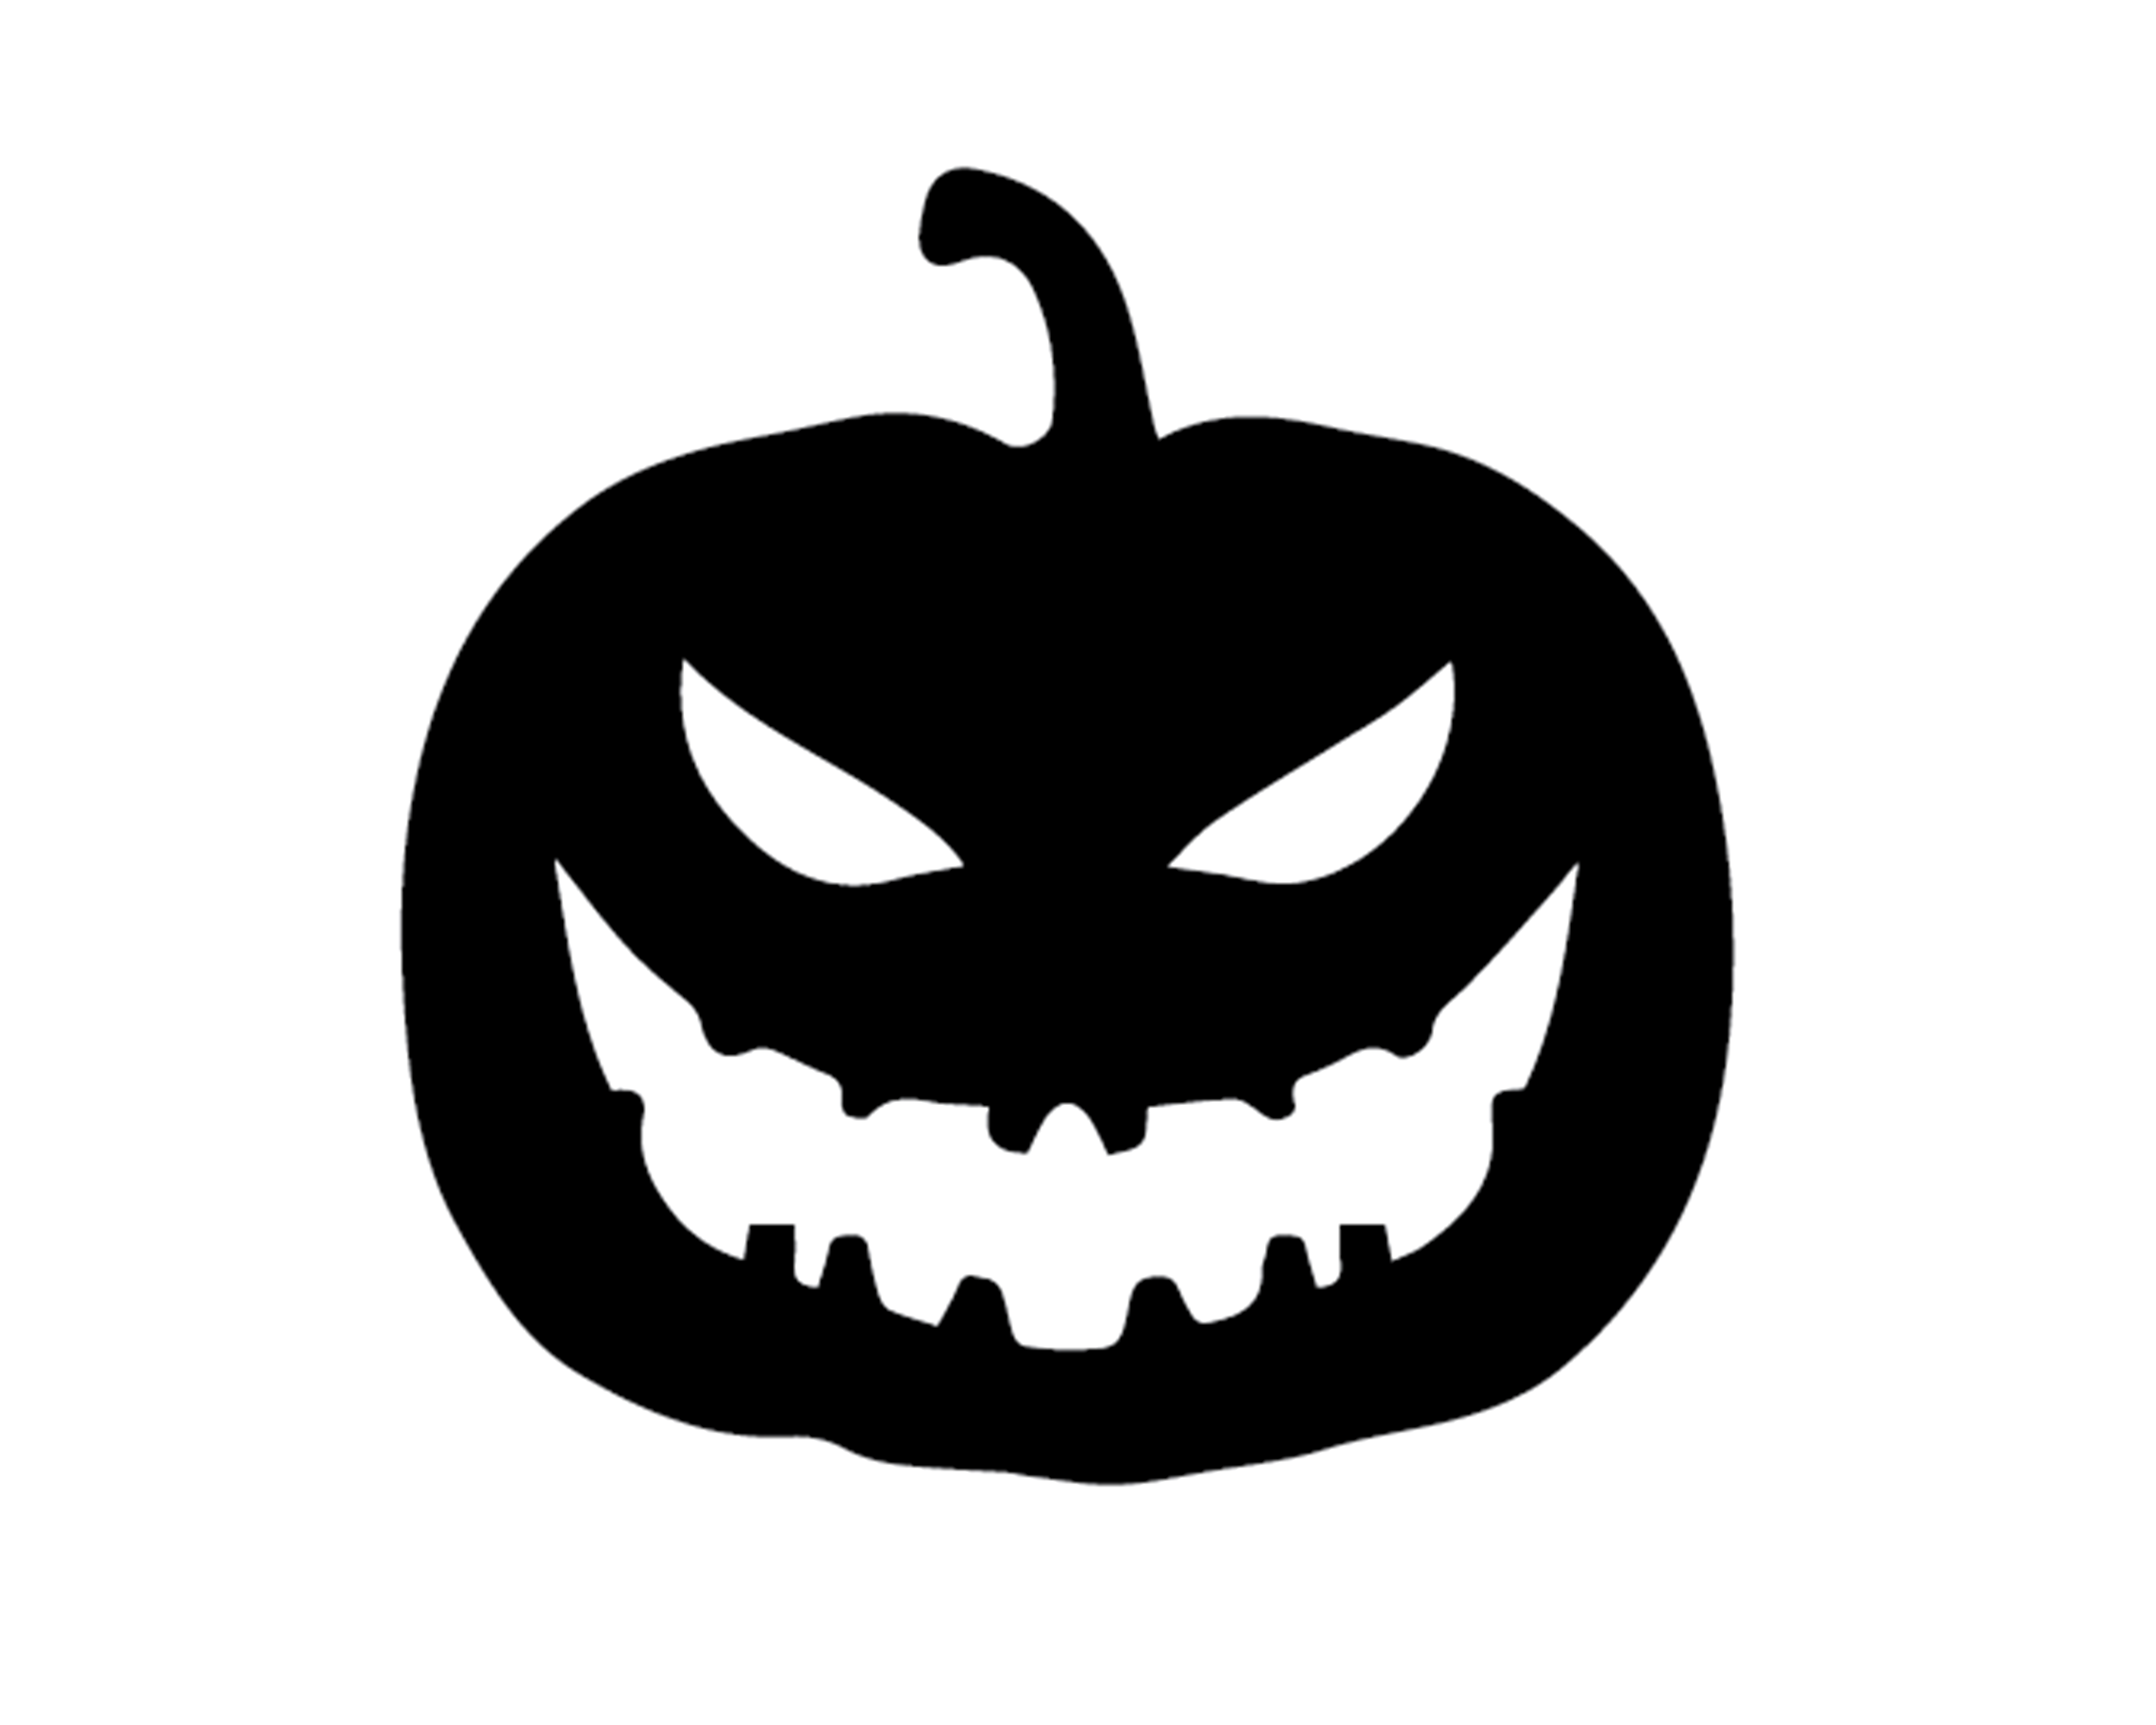 HALLOWEEN PUMPKIN VINYL PAINTING STENCIL SIZE PACK *HIGH QUALITY* ONE15